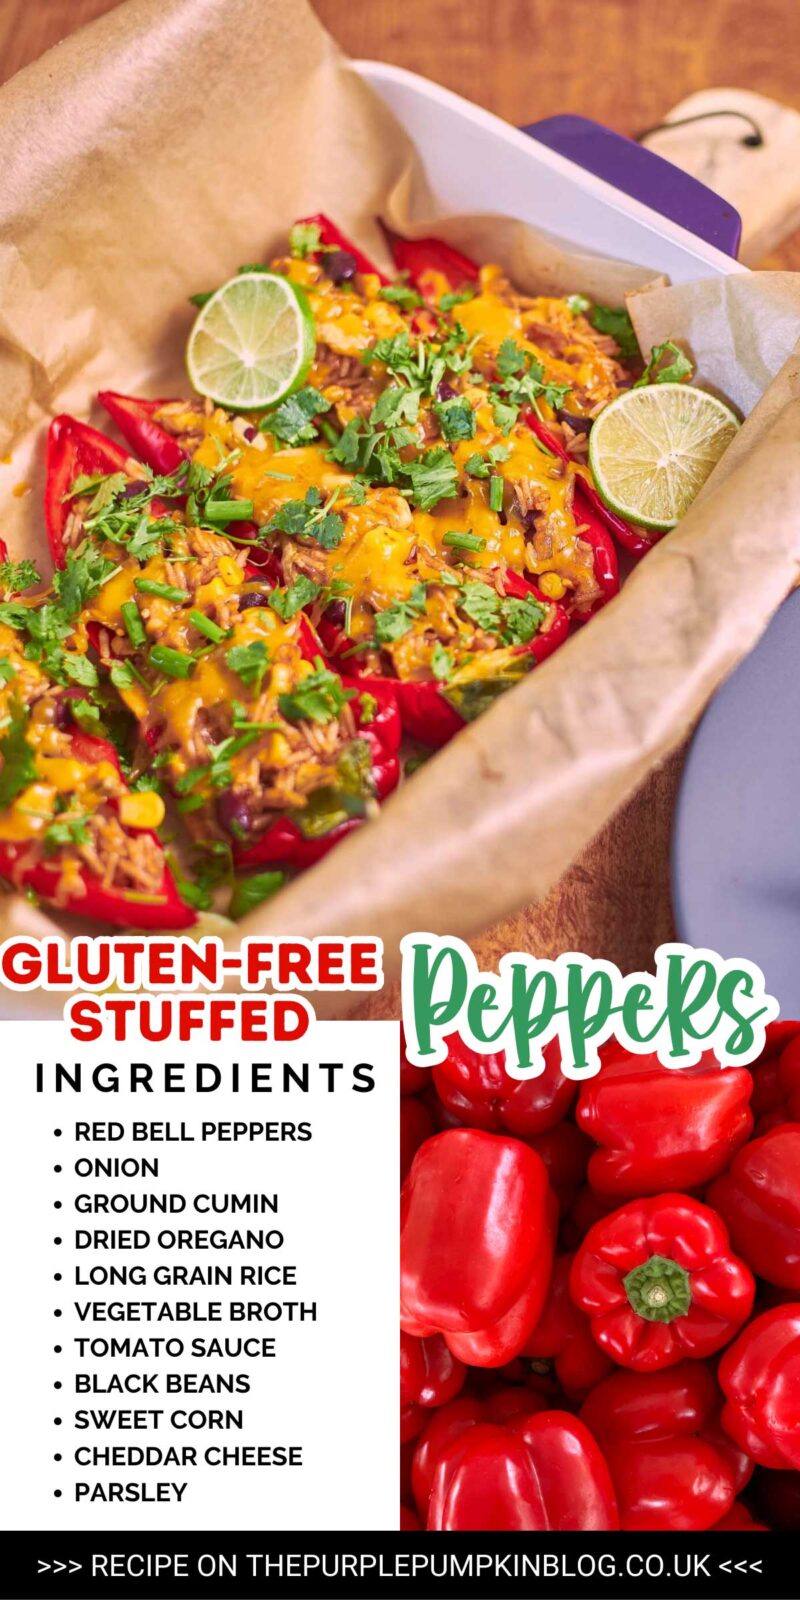 Ingredients Needed for Gluten-Free Stuffed Peppers